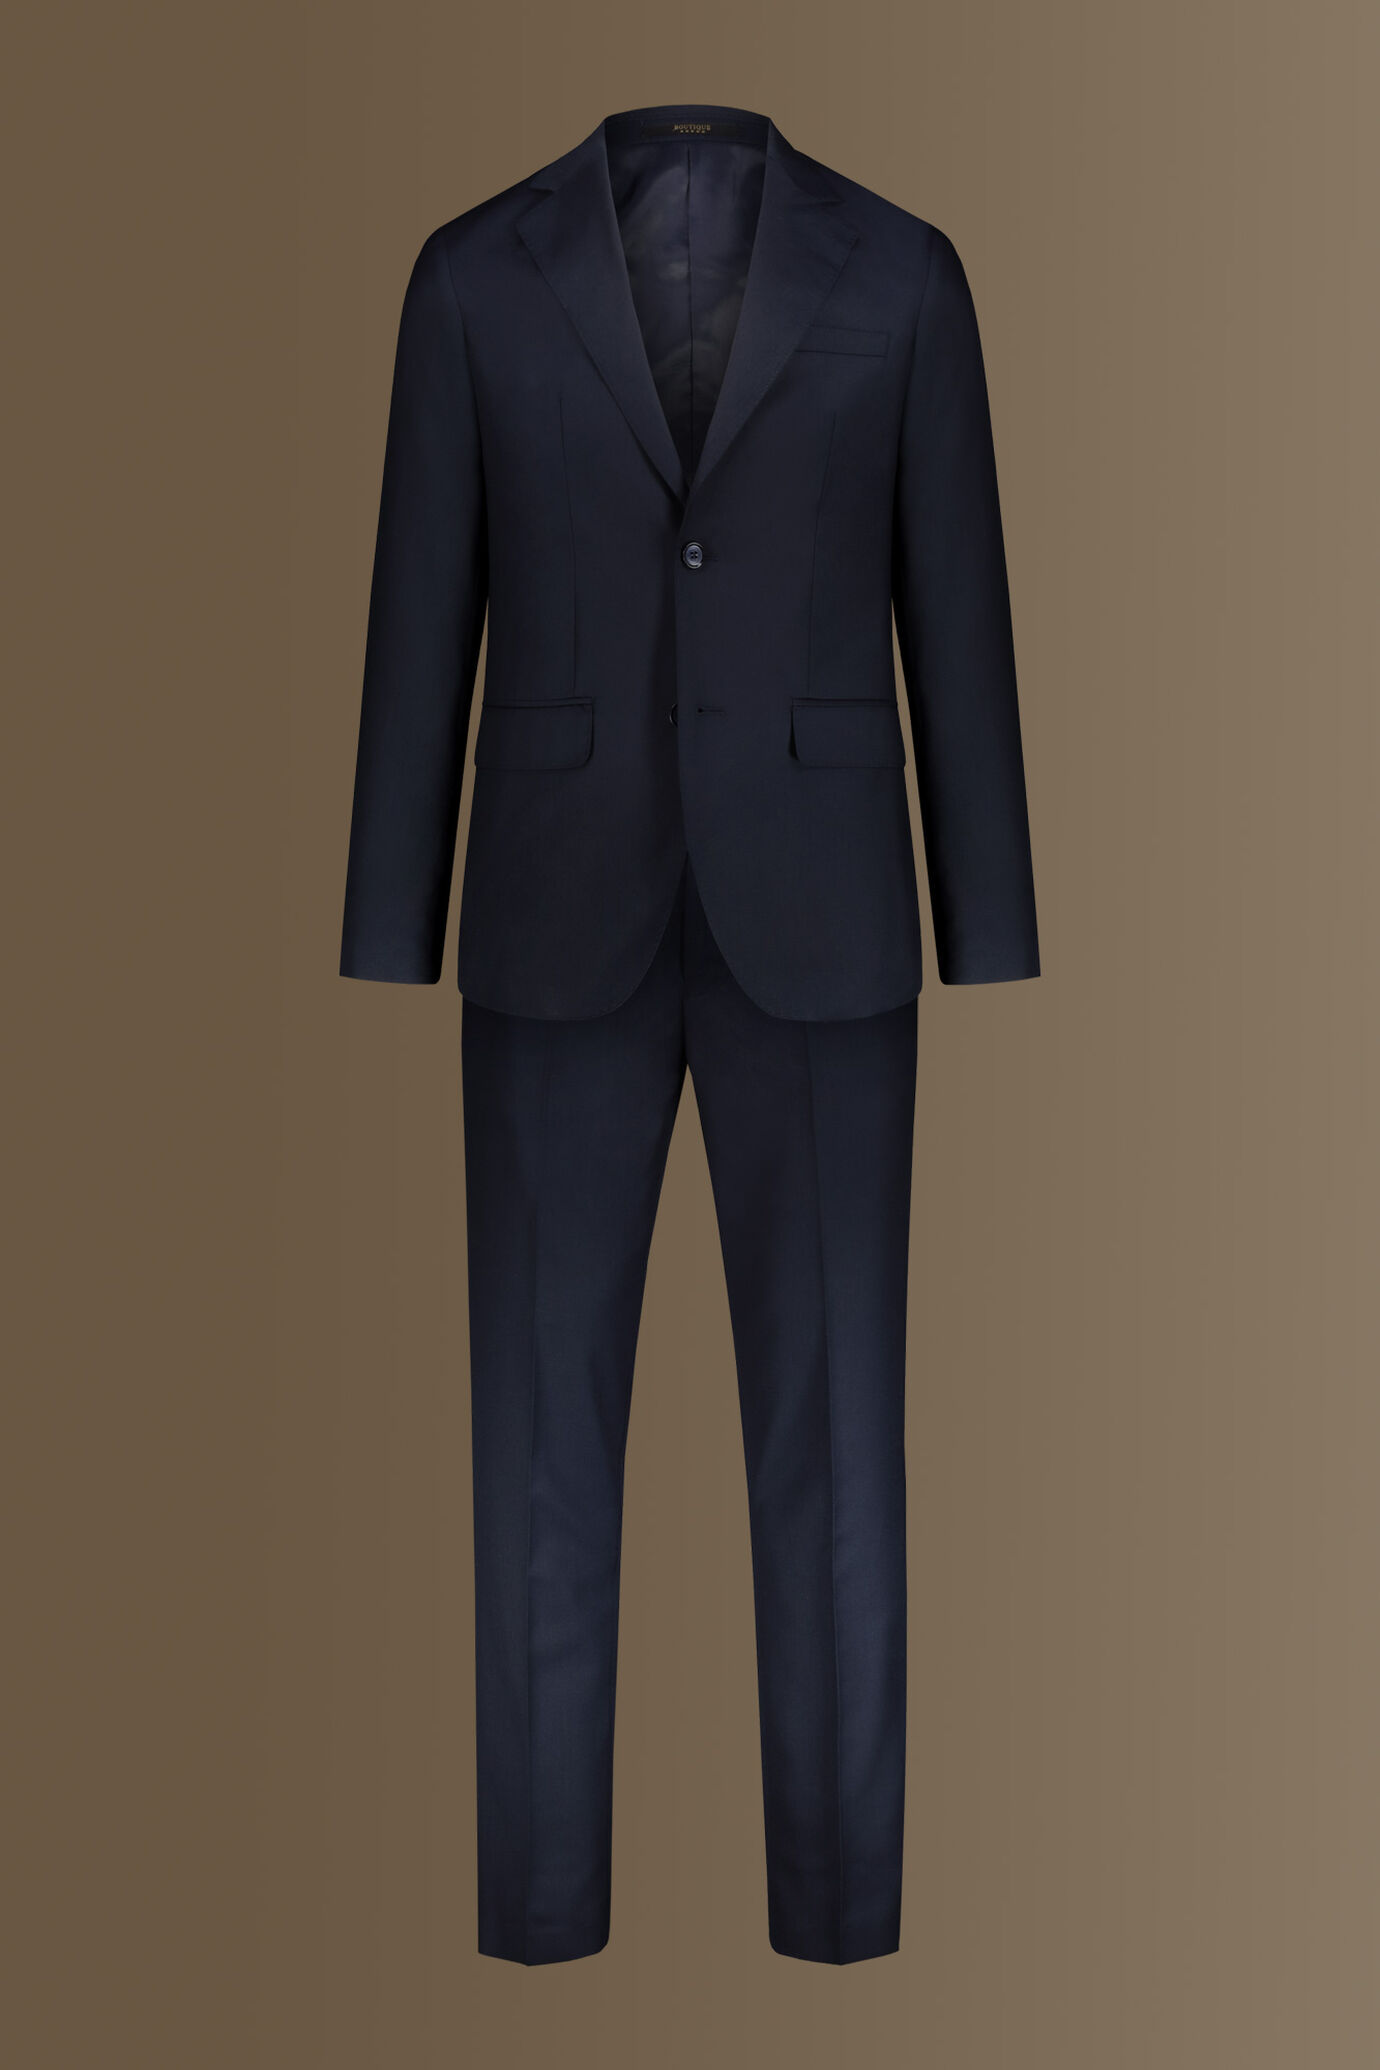 Single breasted suit solid color Twill Fabric